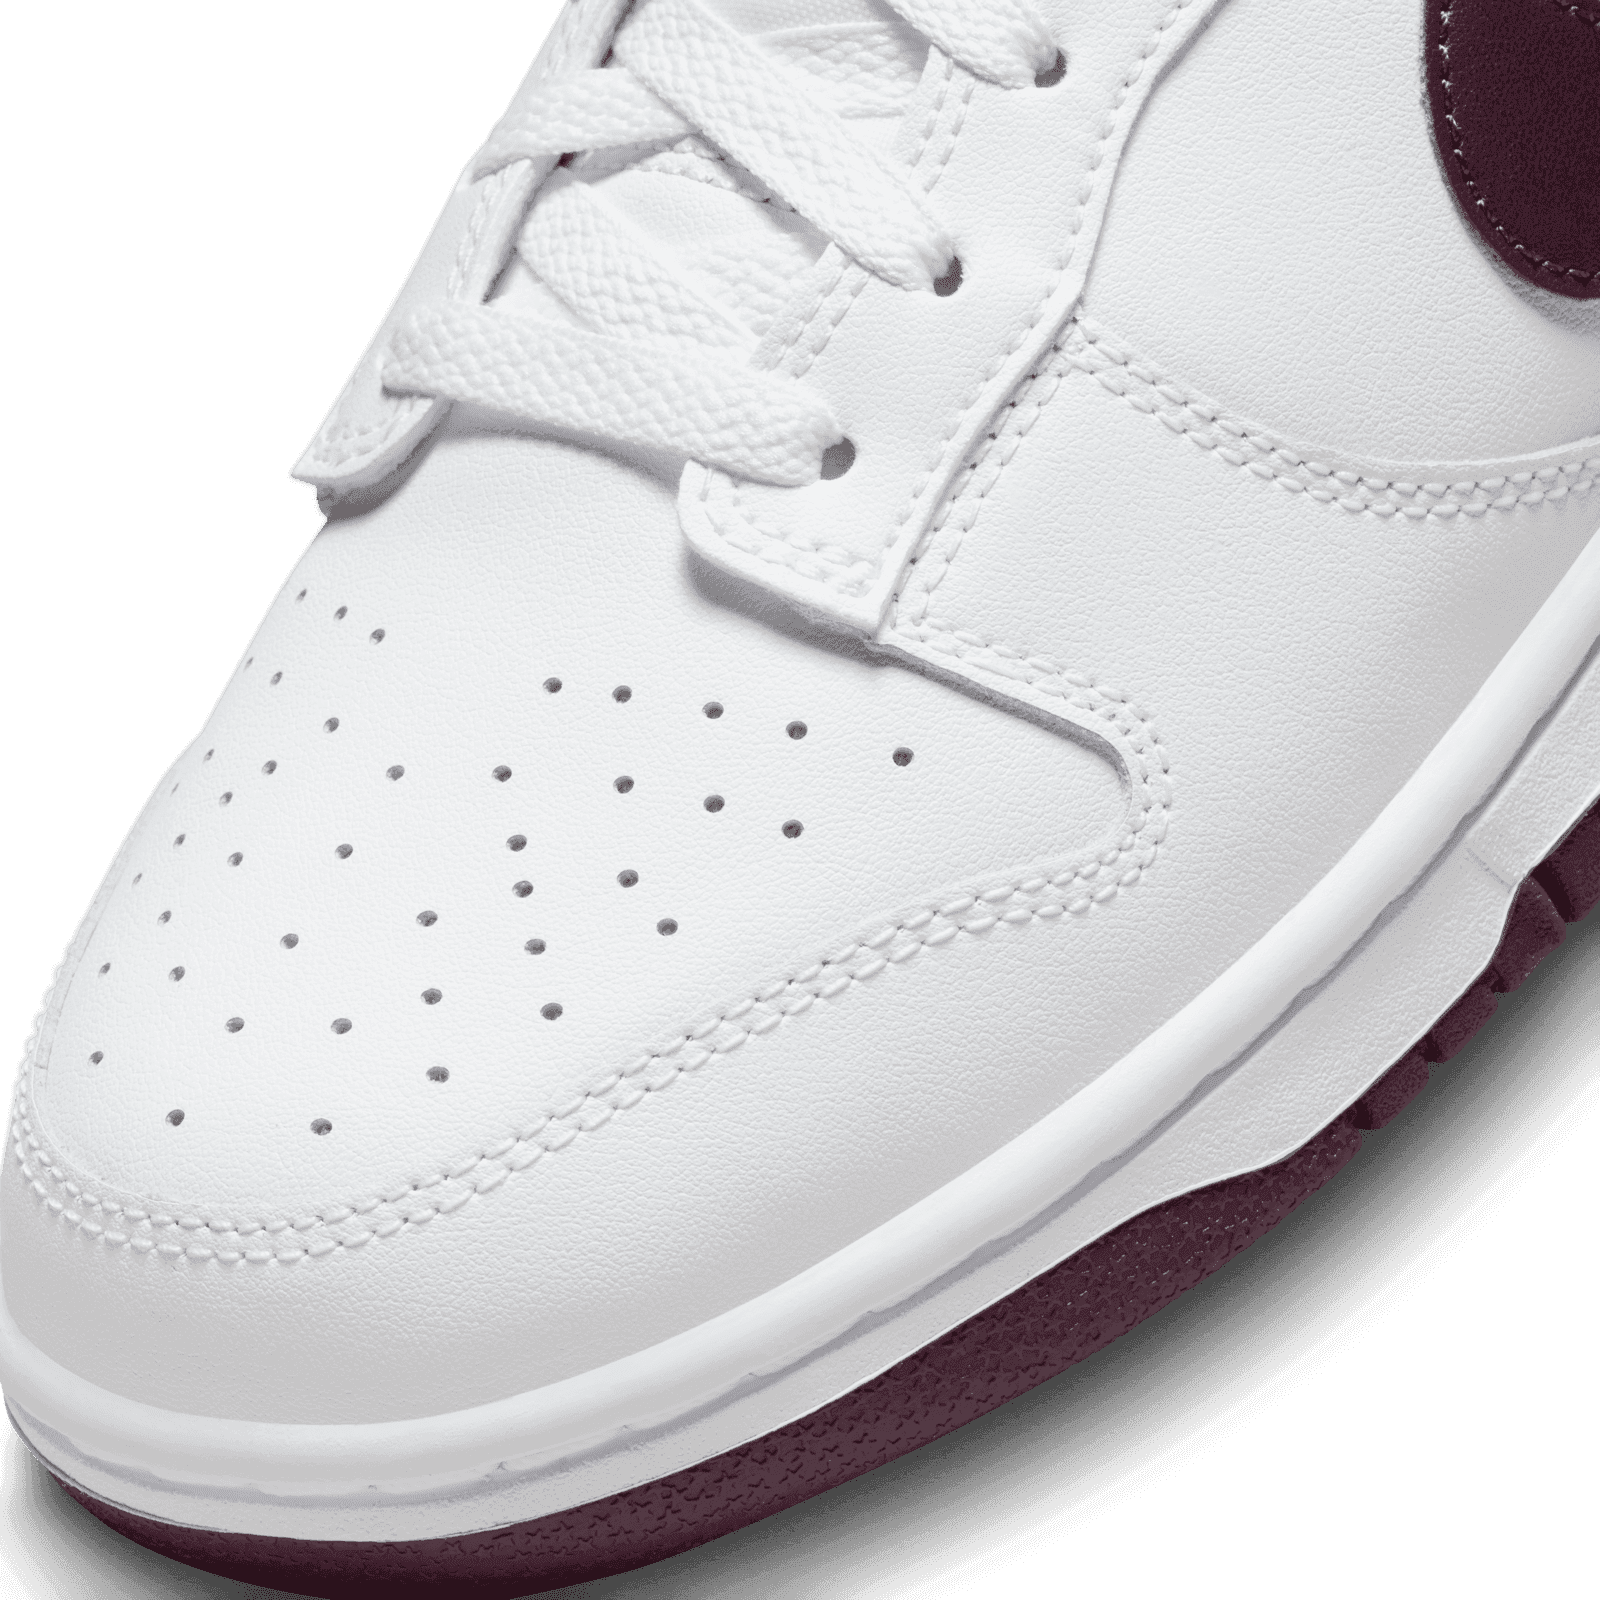 Nike Dunk Low White Night Maroon - DV0831-102 Raffles and Release Date